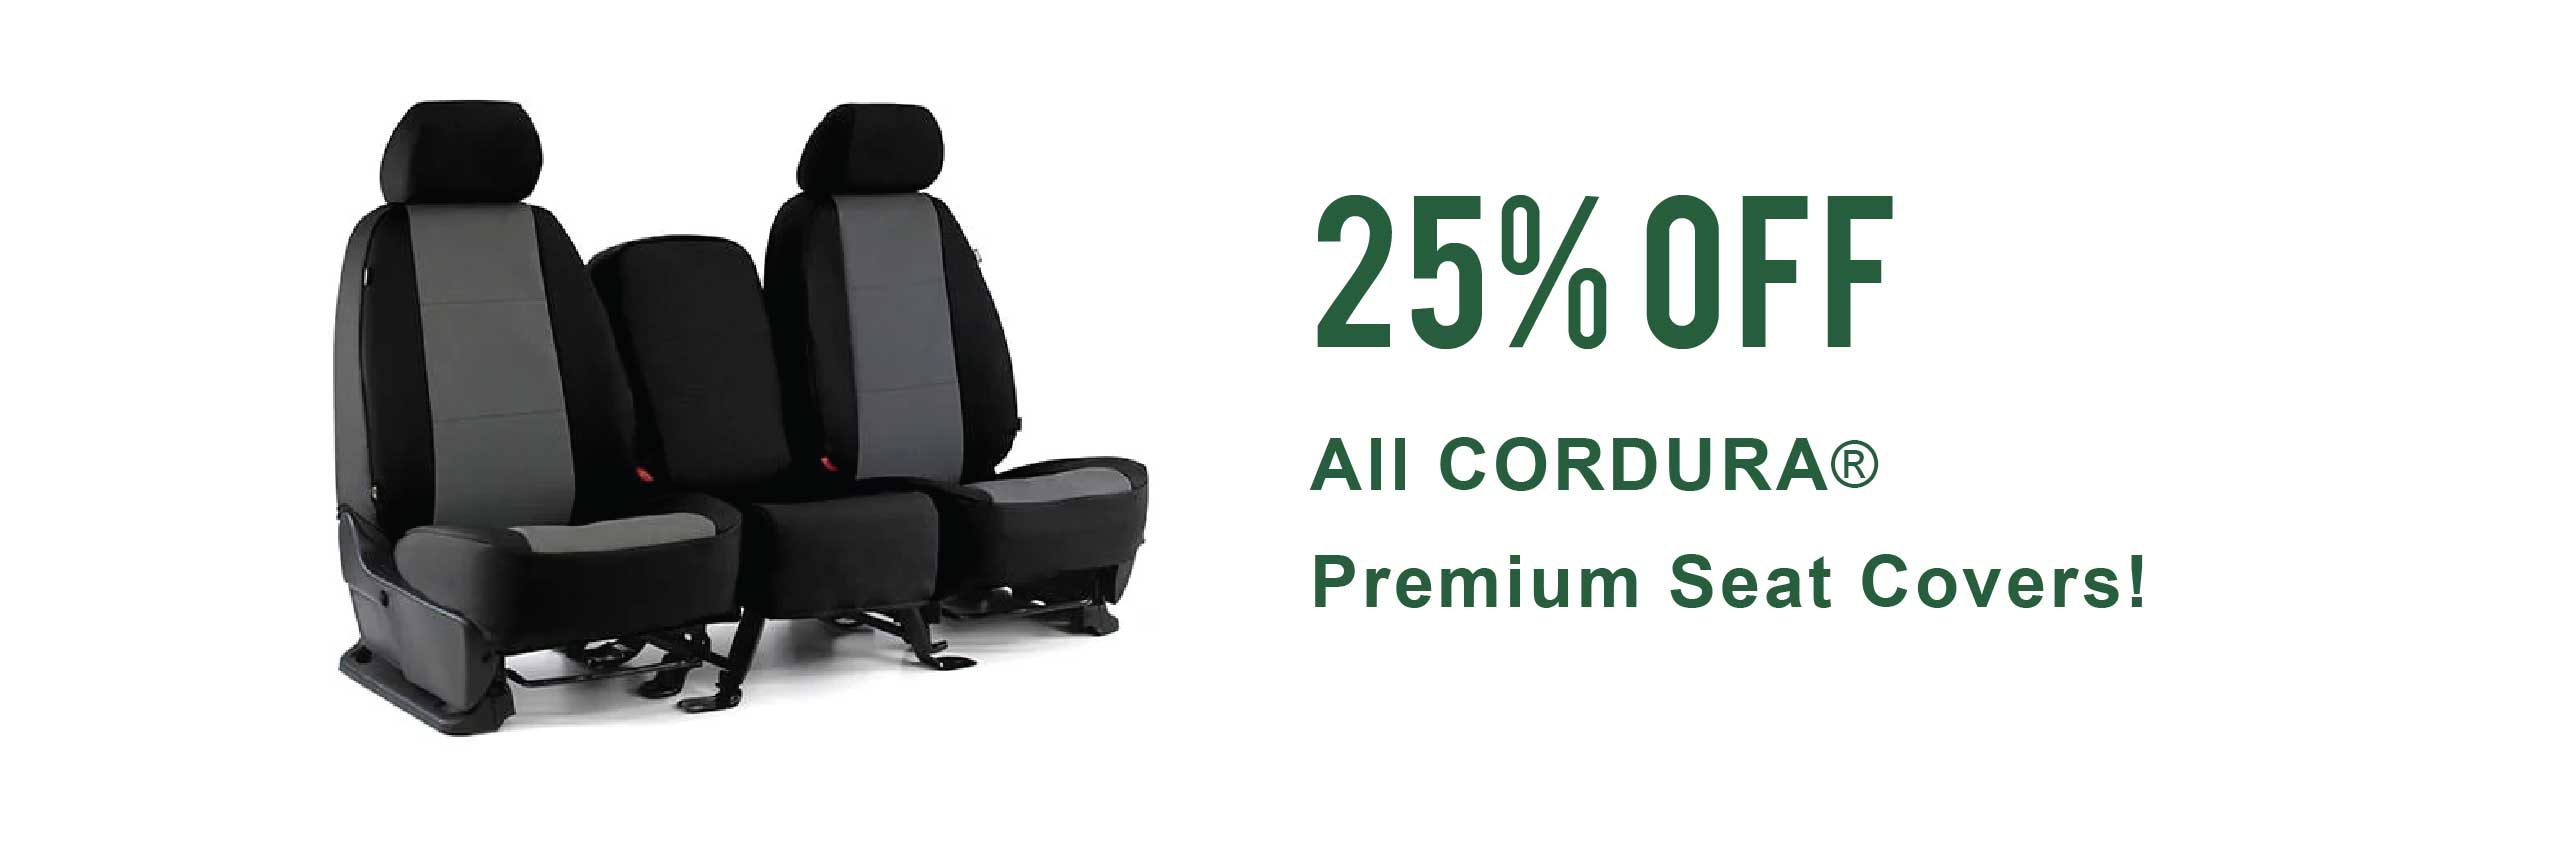 25% Off All Cordura Seat Covers!